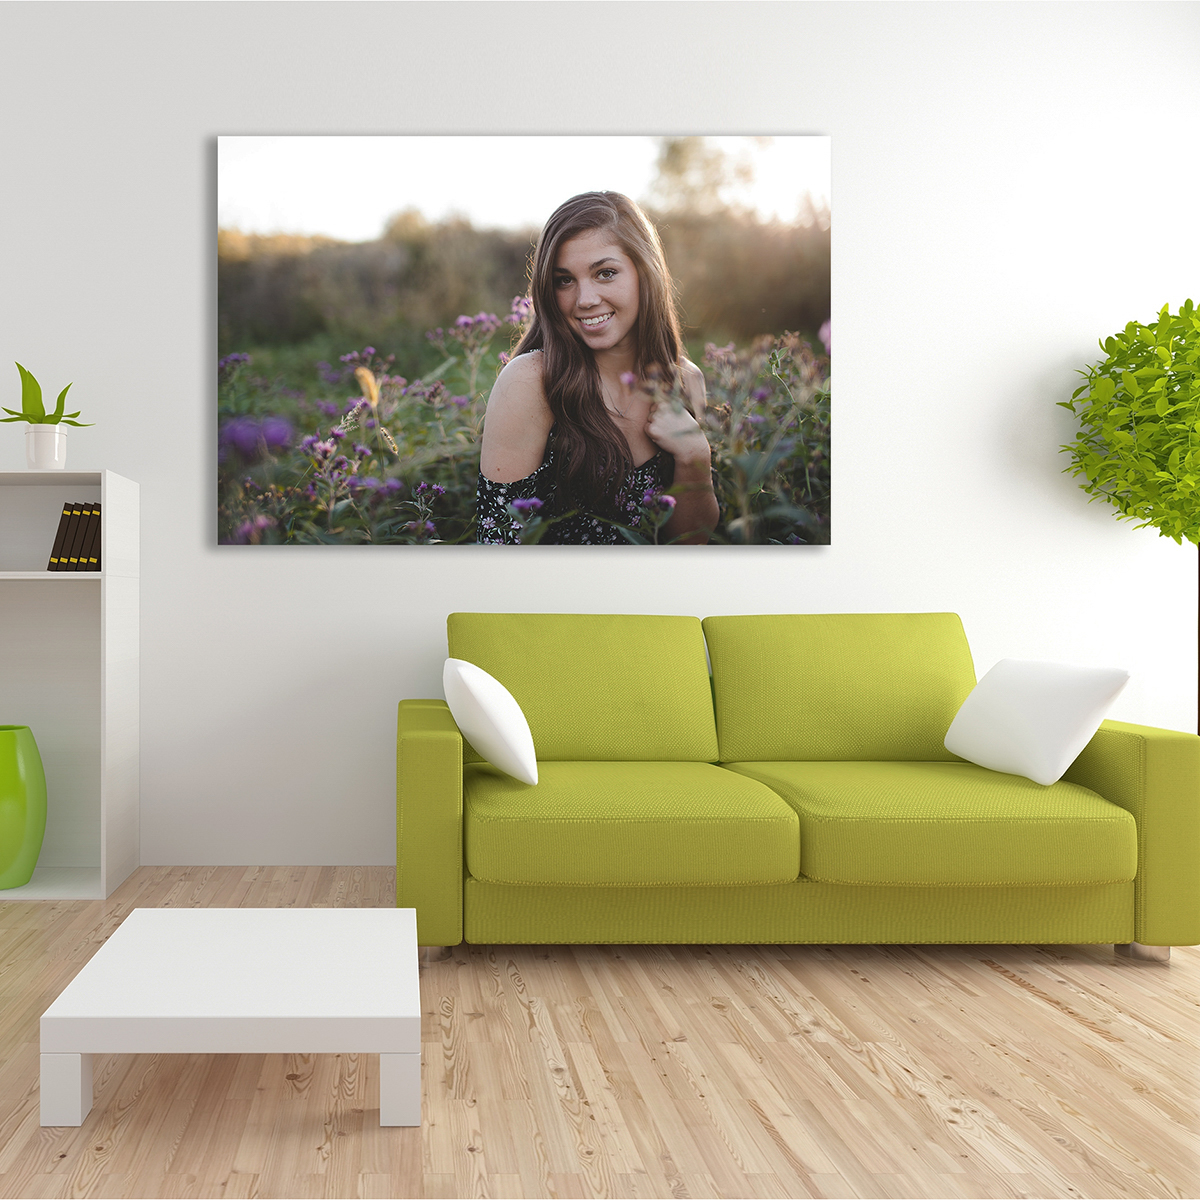 Trust a Professional Printing Company to reprint on canvas